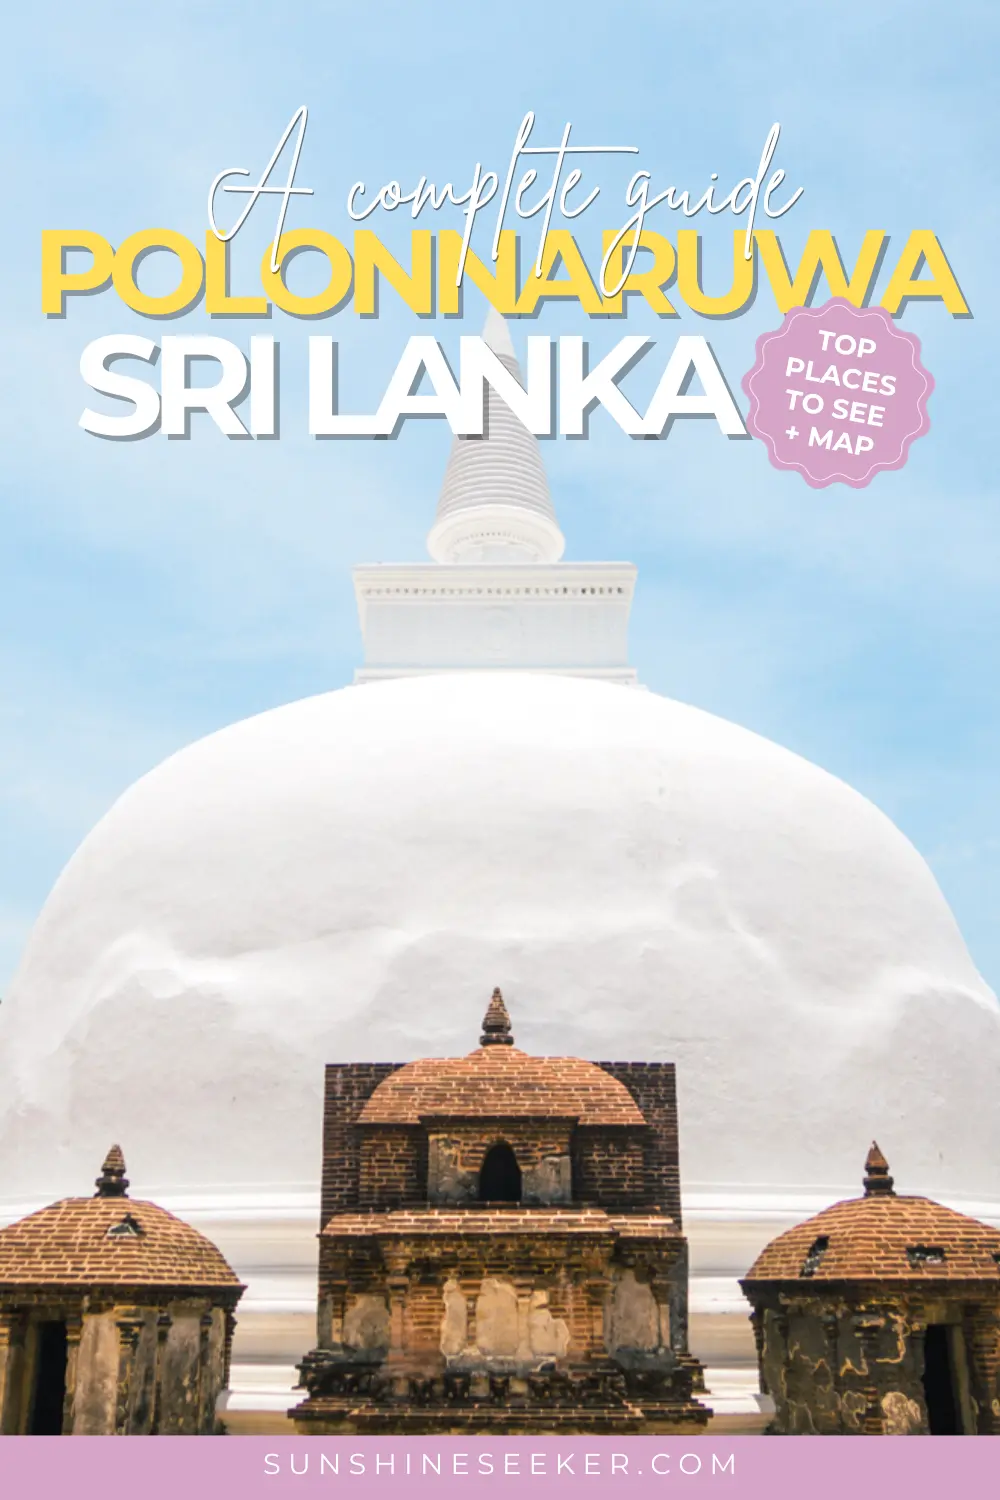 Everything you need to know before visiting Polonnaruwa, Sri Lanka. Hoe to get there ´the best way to get around Polonnaruwa, car, bike or tuk-tuk.